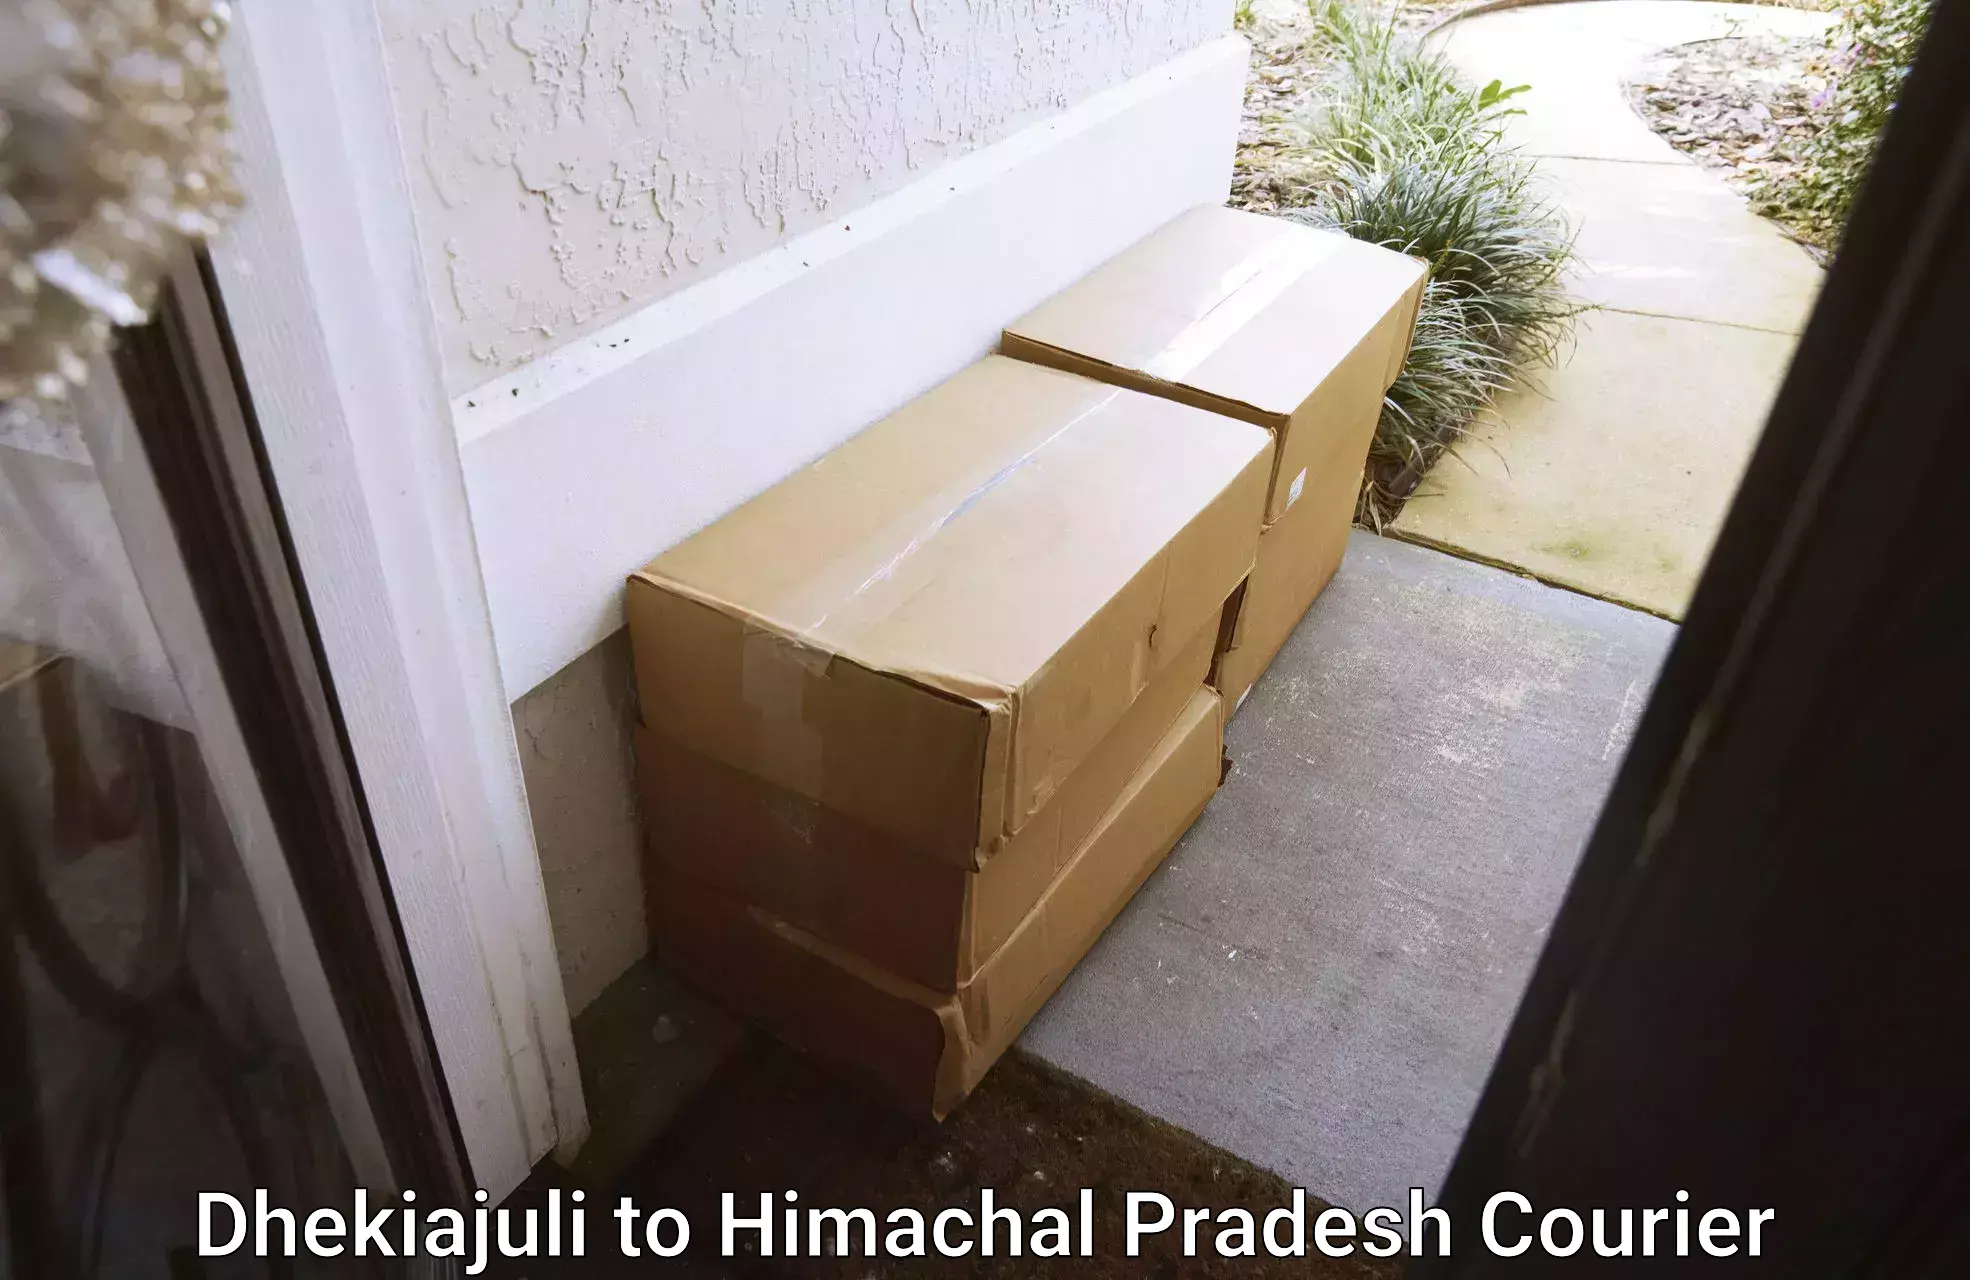 Package delivery network Dhekiajuli to Himachal Pradesh